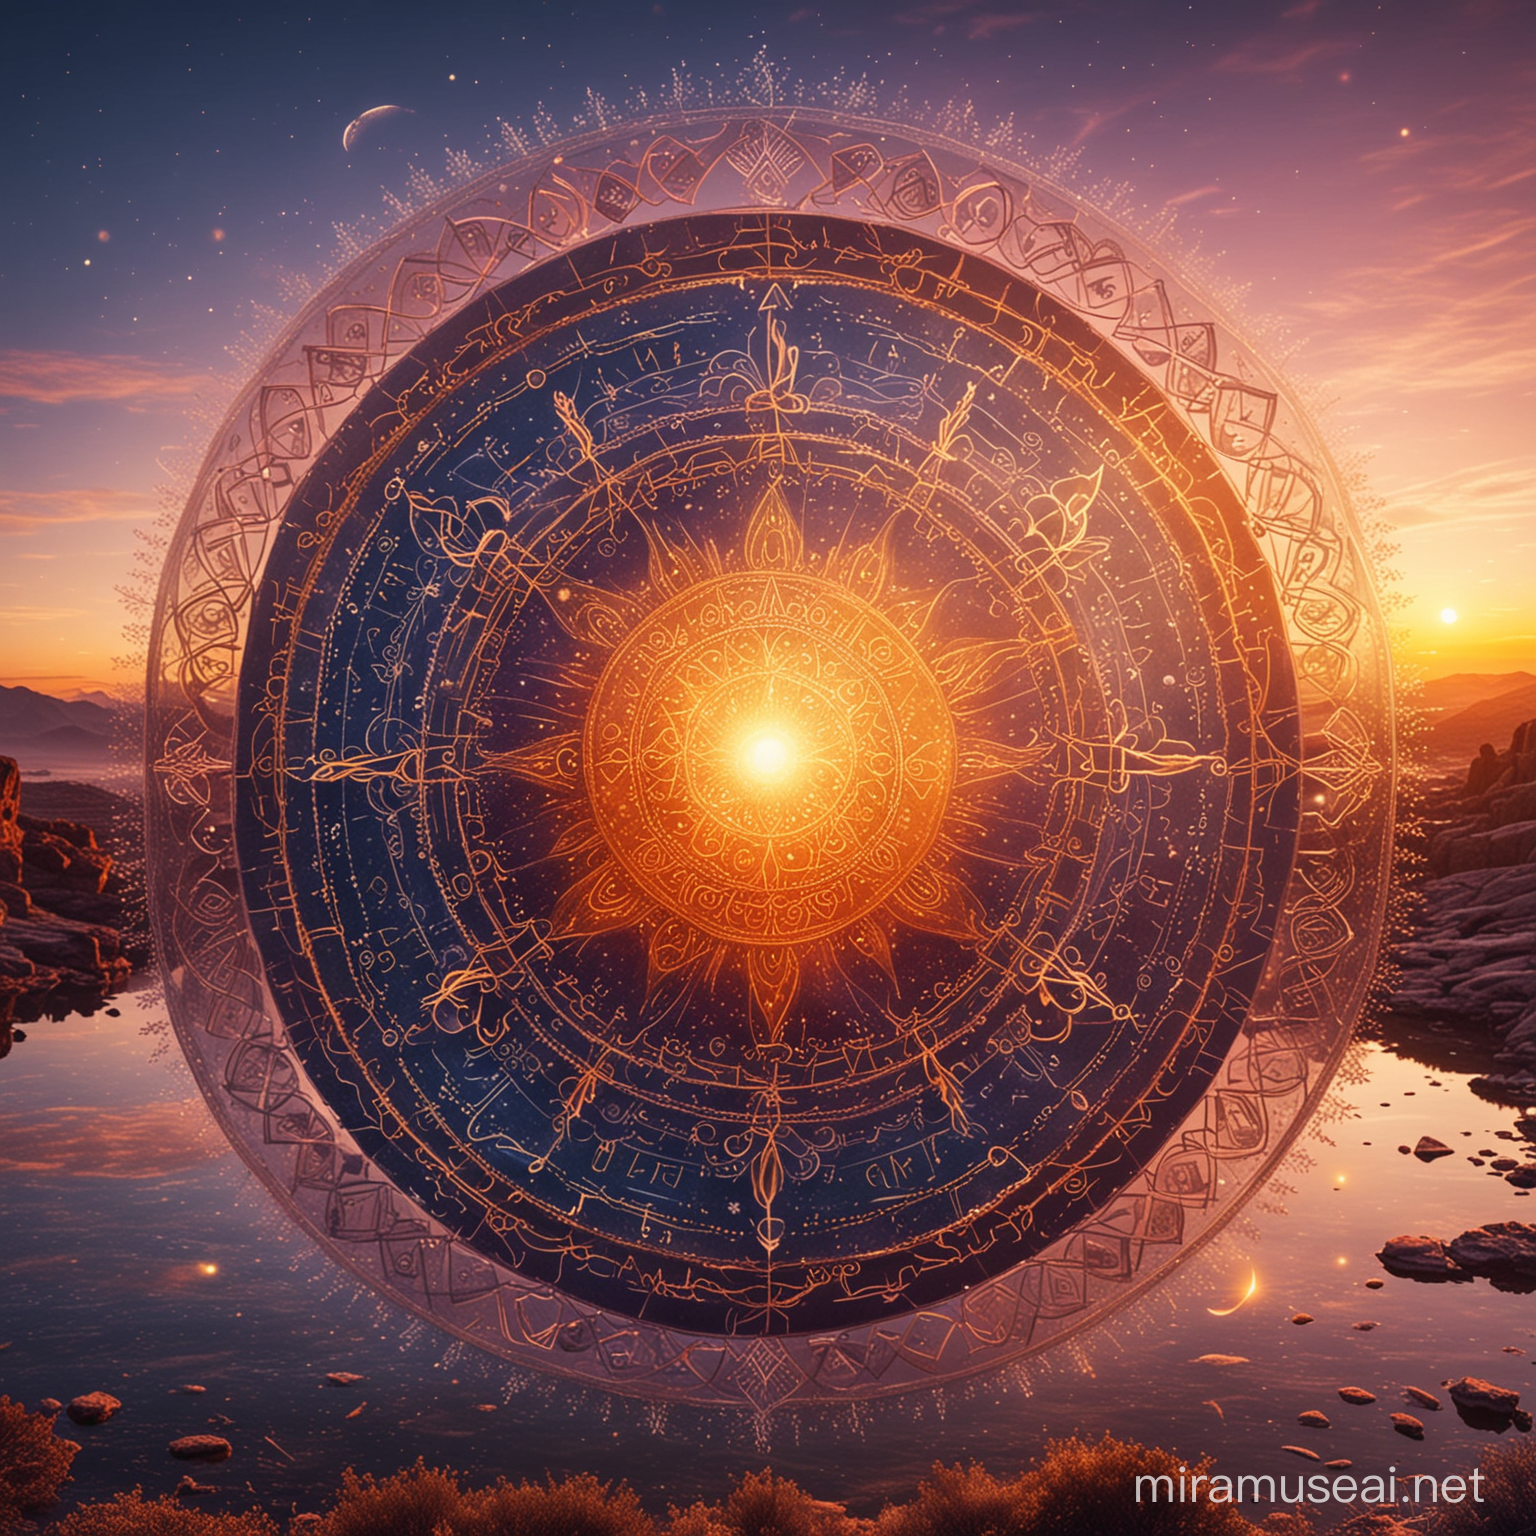 mandala of signs floating in a magical environment with sparkles quantum astrology, sky, wheel of signs in the sky, environment of mystery, lunar eclipse at sunset